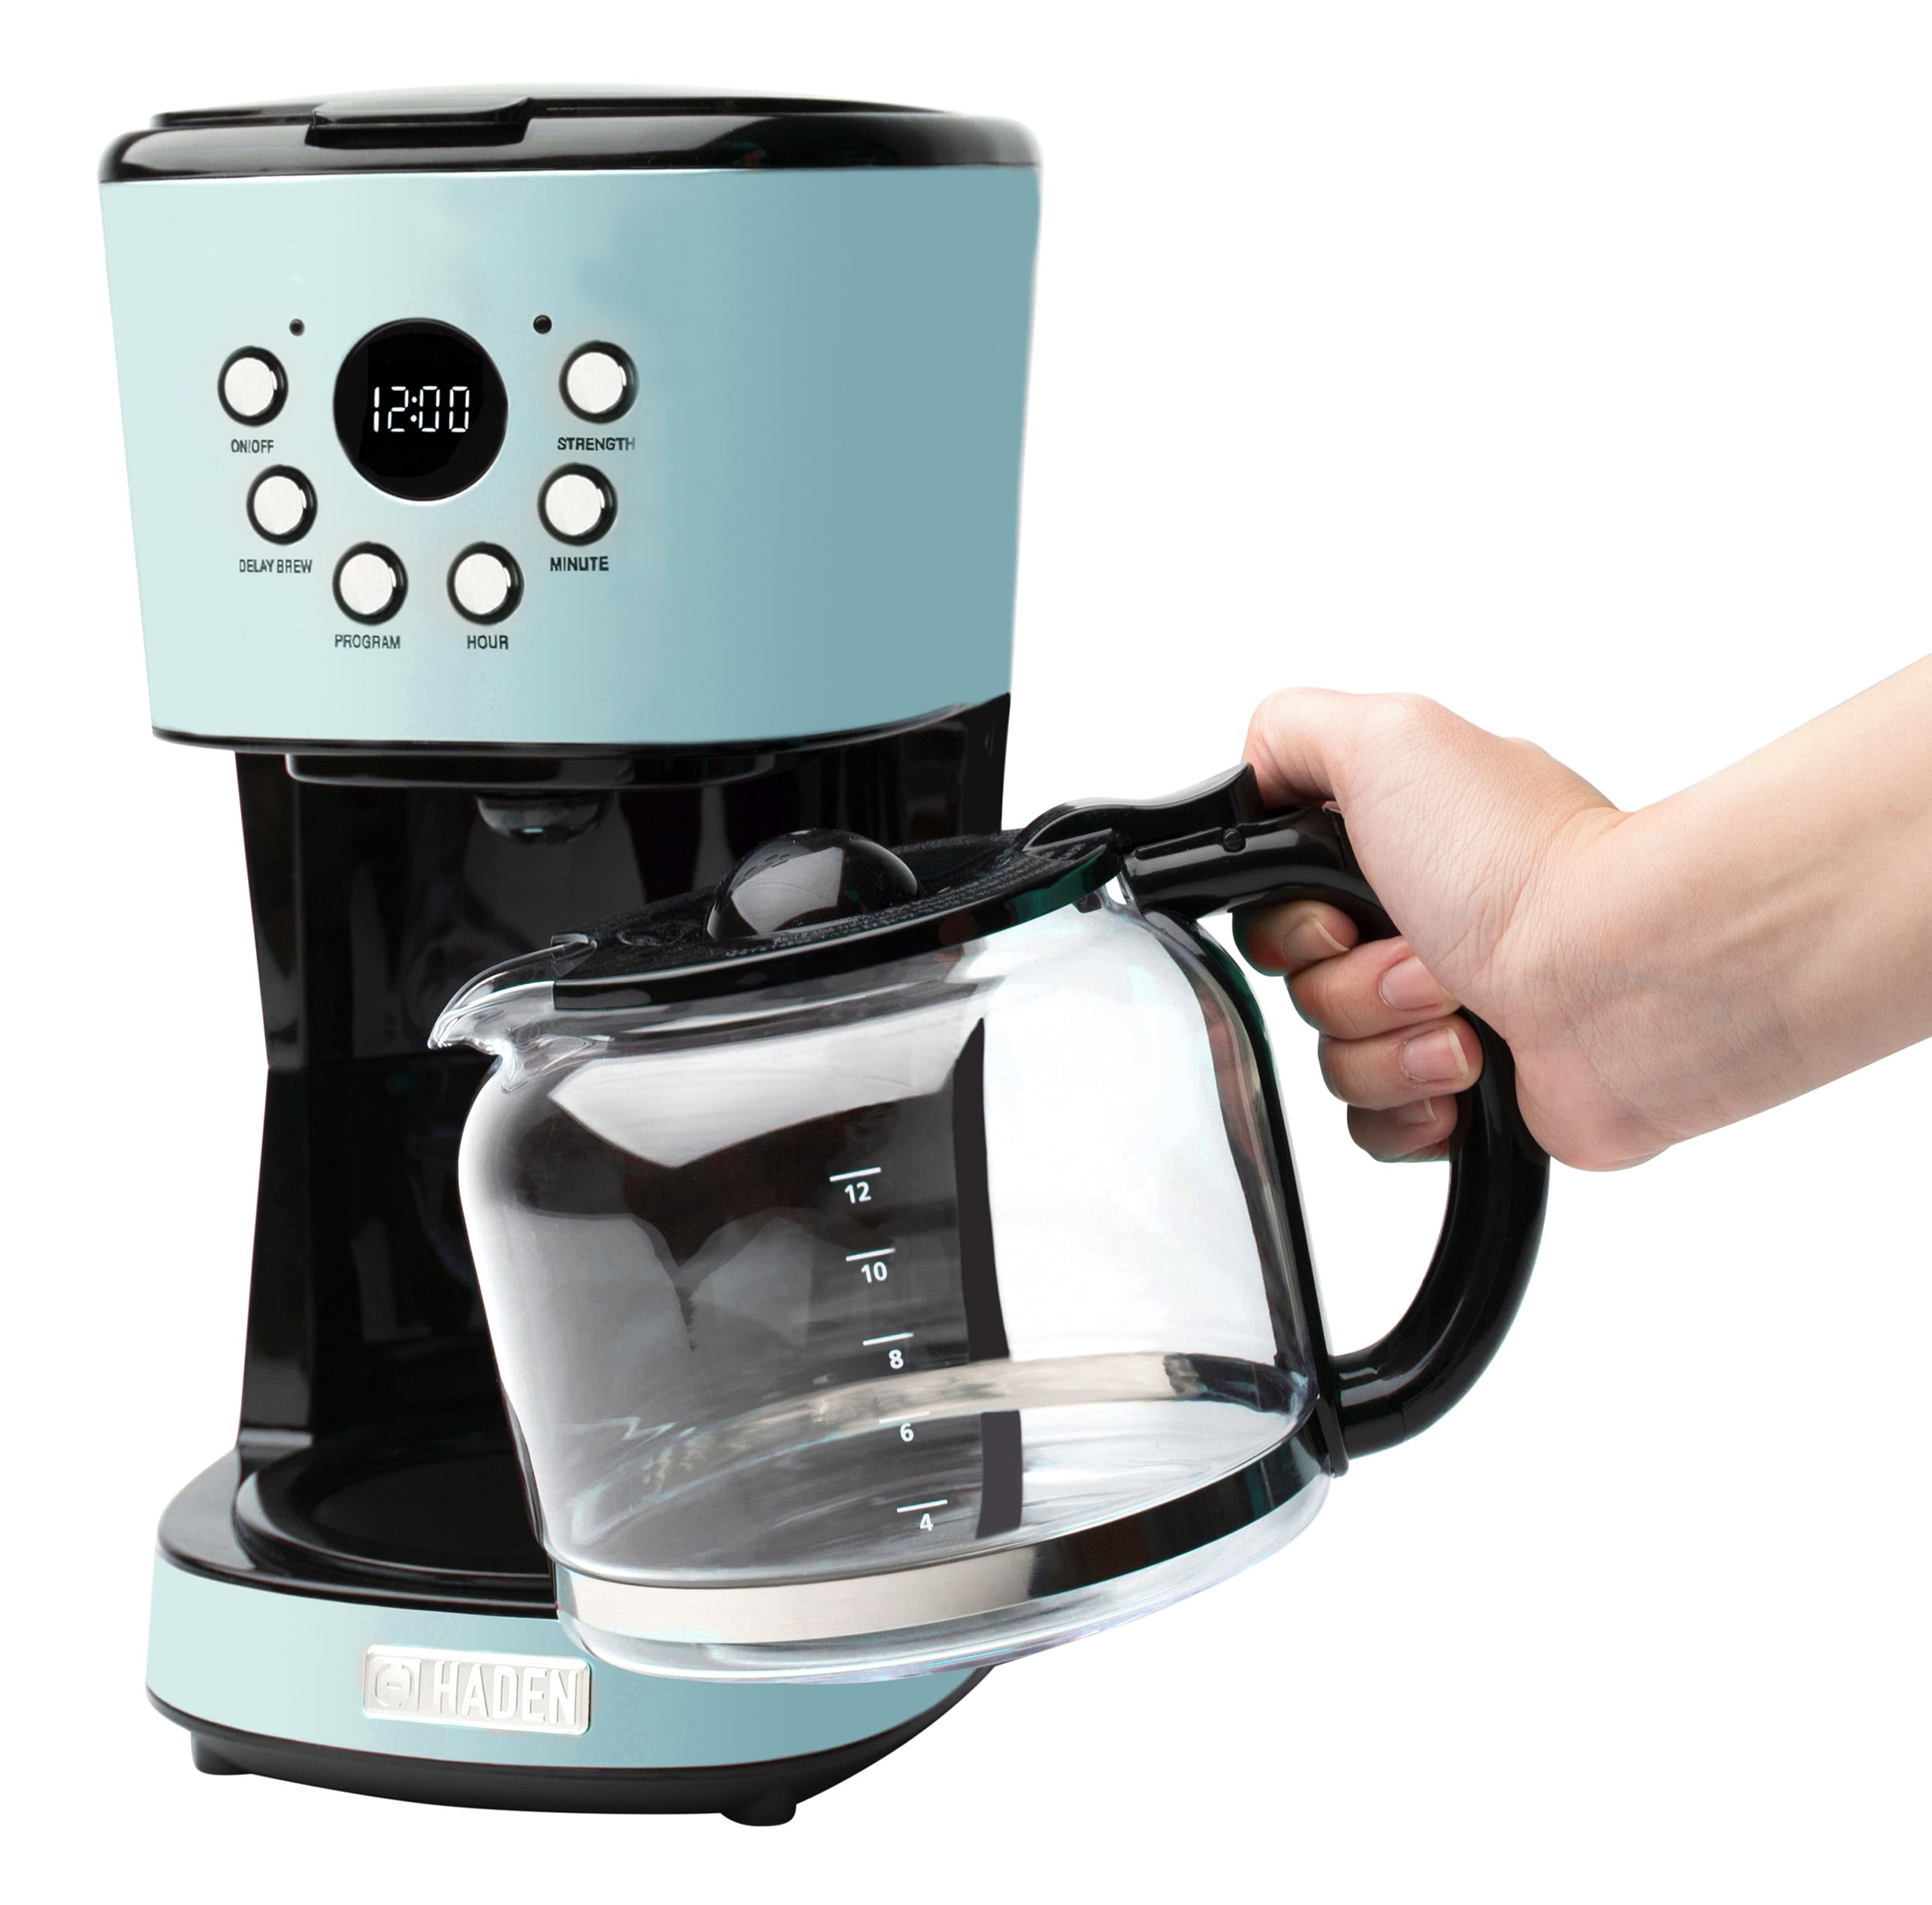 Haden Heritage 12-Cup Turquoise Residential Drip Coffee Maker